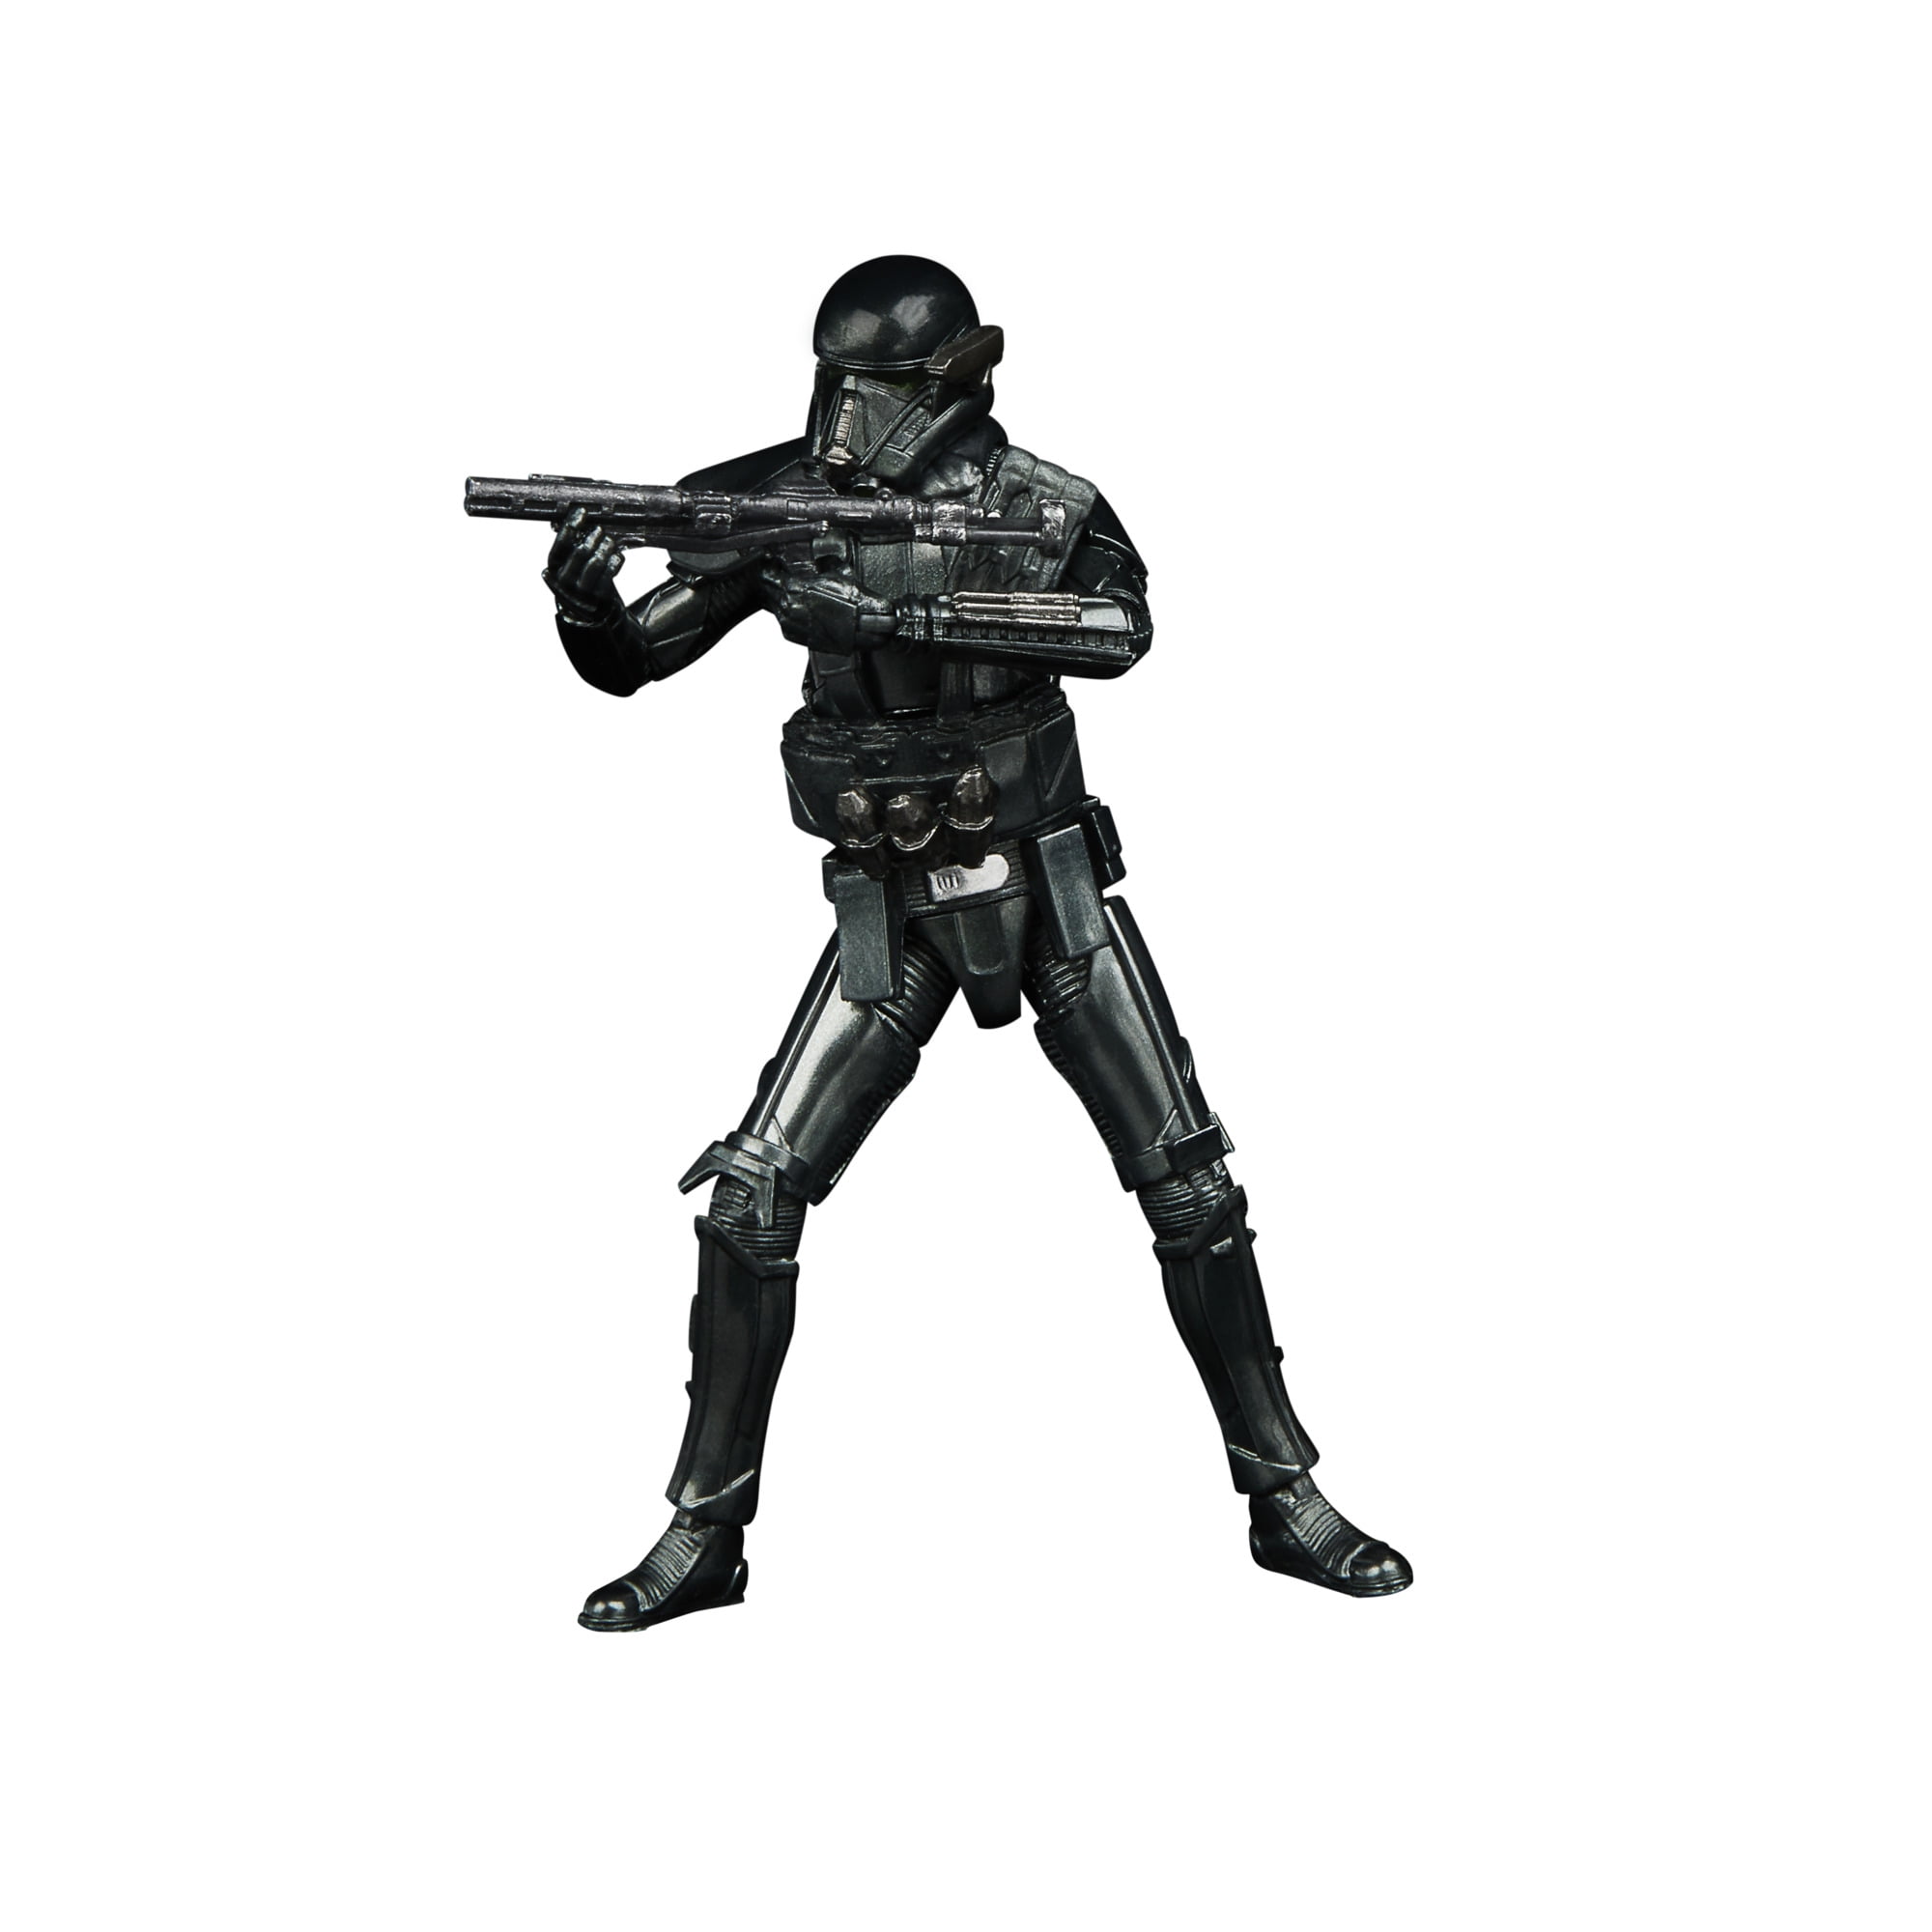 VC Imperial Death Trooper The Mandalorian Star Wars Hasbro 3,75" Rogue One 